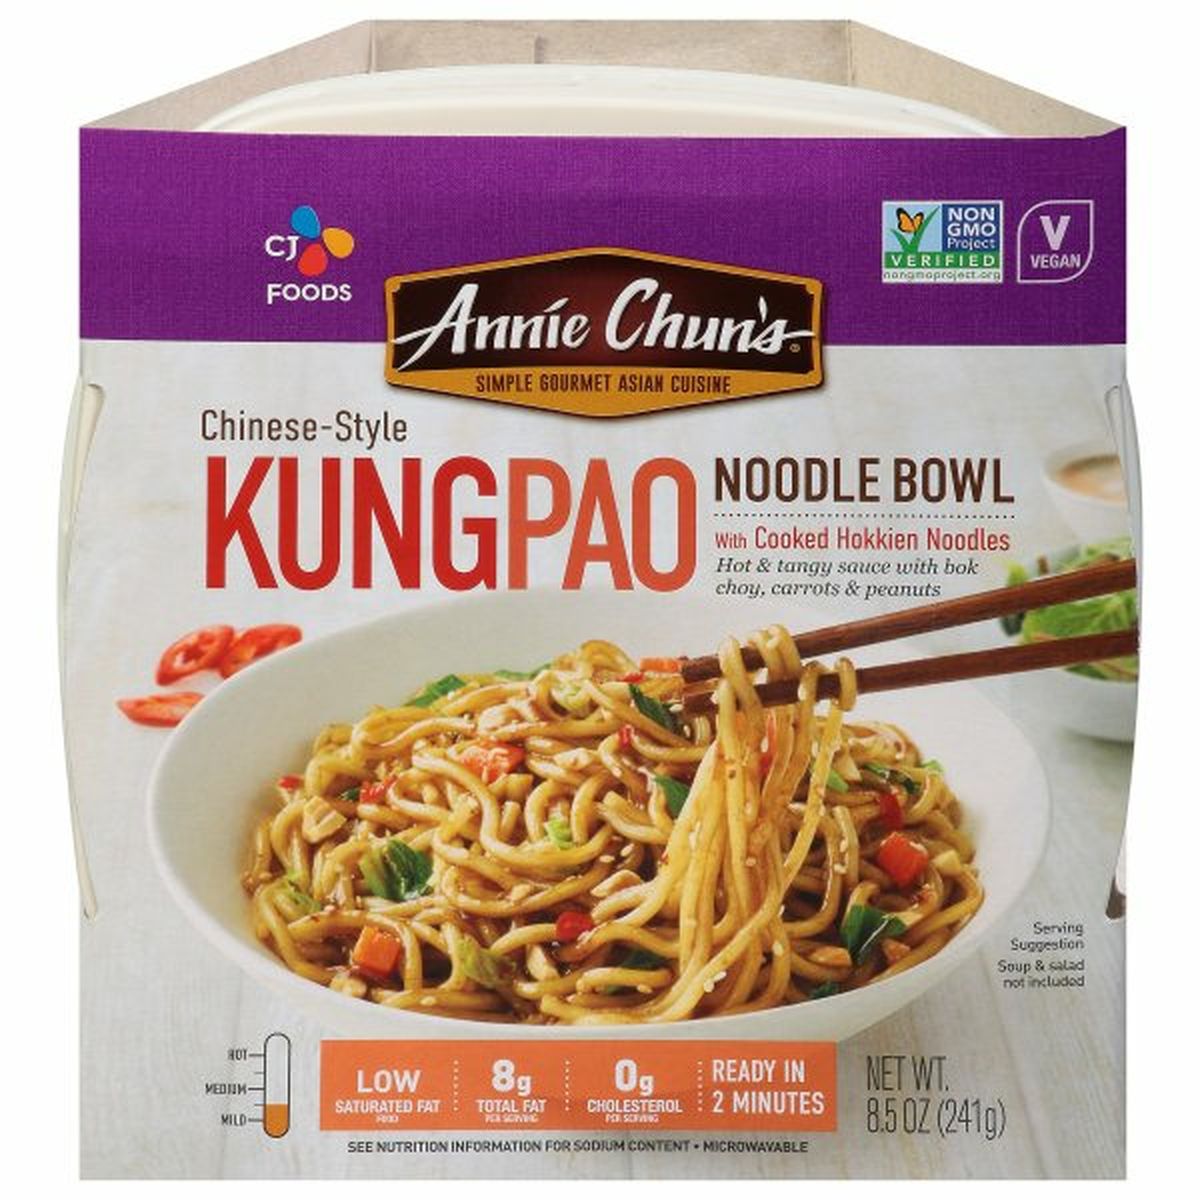 Calories in Annie Chuns Noodle Bowl, KungPao, Chinese-Style